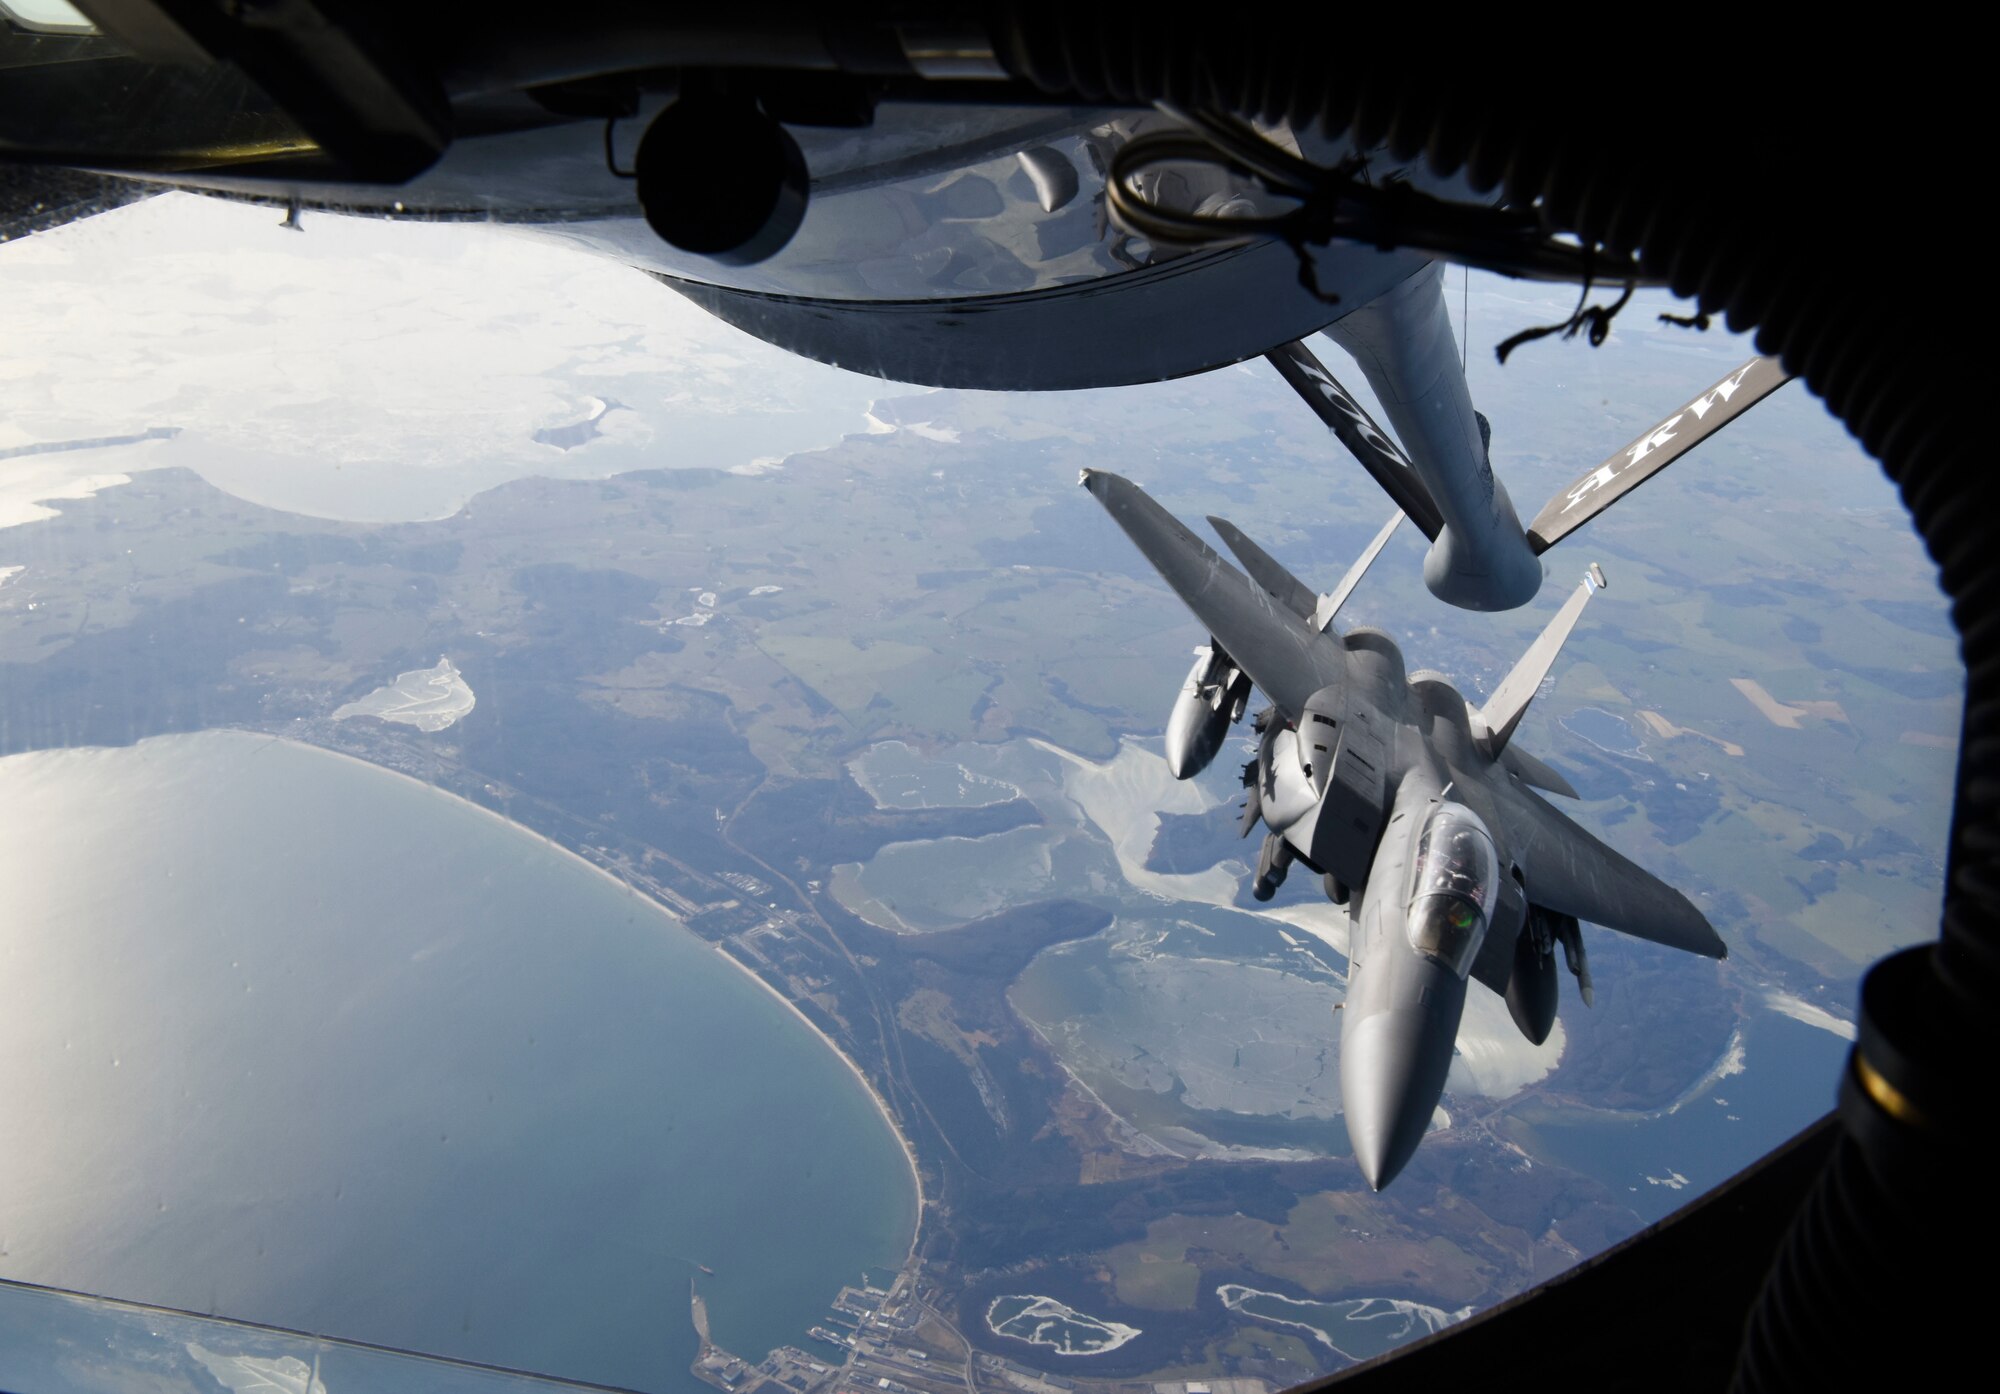 One of four U.S. Air Force F-15E Strike Eagle aircraft assigned to the 48th Fighter Wing, Royal Air Force Lakenheath, England, finishes refueling from a KC-135 Stratotanker aircraft assigned to the 100th Air Refueling Wing from RAF Mildenhall, England, as they fly to Estonia on their day of independence, Feb. 24, 2021. The four fighter jets participated in the Estonian Independence Day fly-over, joining L-39 training jets and a M-28 transport aircraft of the Estonian Air Force, Eurofighter Typhoon fighter jets from the German Air Force deployed to Estonia as part of the Baltic Air Policing Mission, and Eurofighter Typhoon fighter jets from the Italian Air Force deployed as part of the Baltic Air Policing Mission in Lithuania. (U.S. Air Force Photo by Airman 1st Class David C Busby)